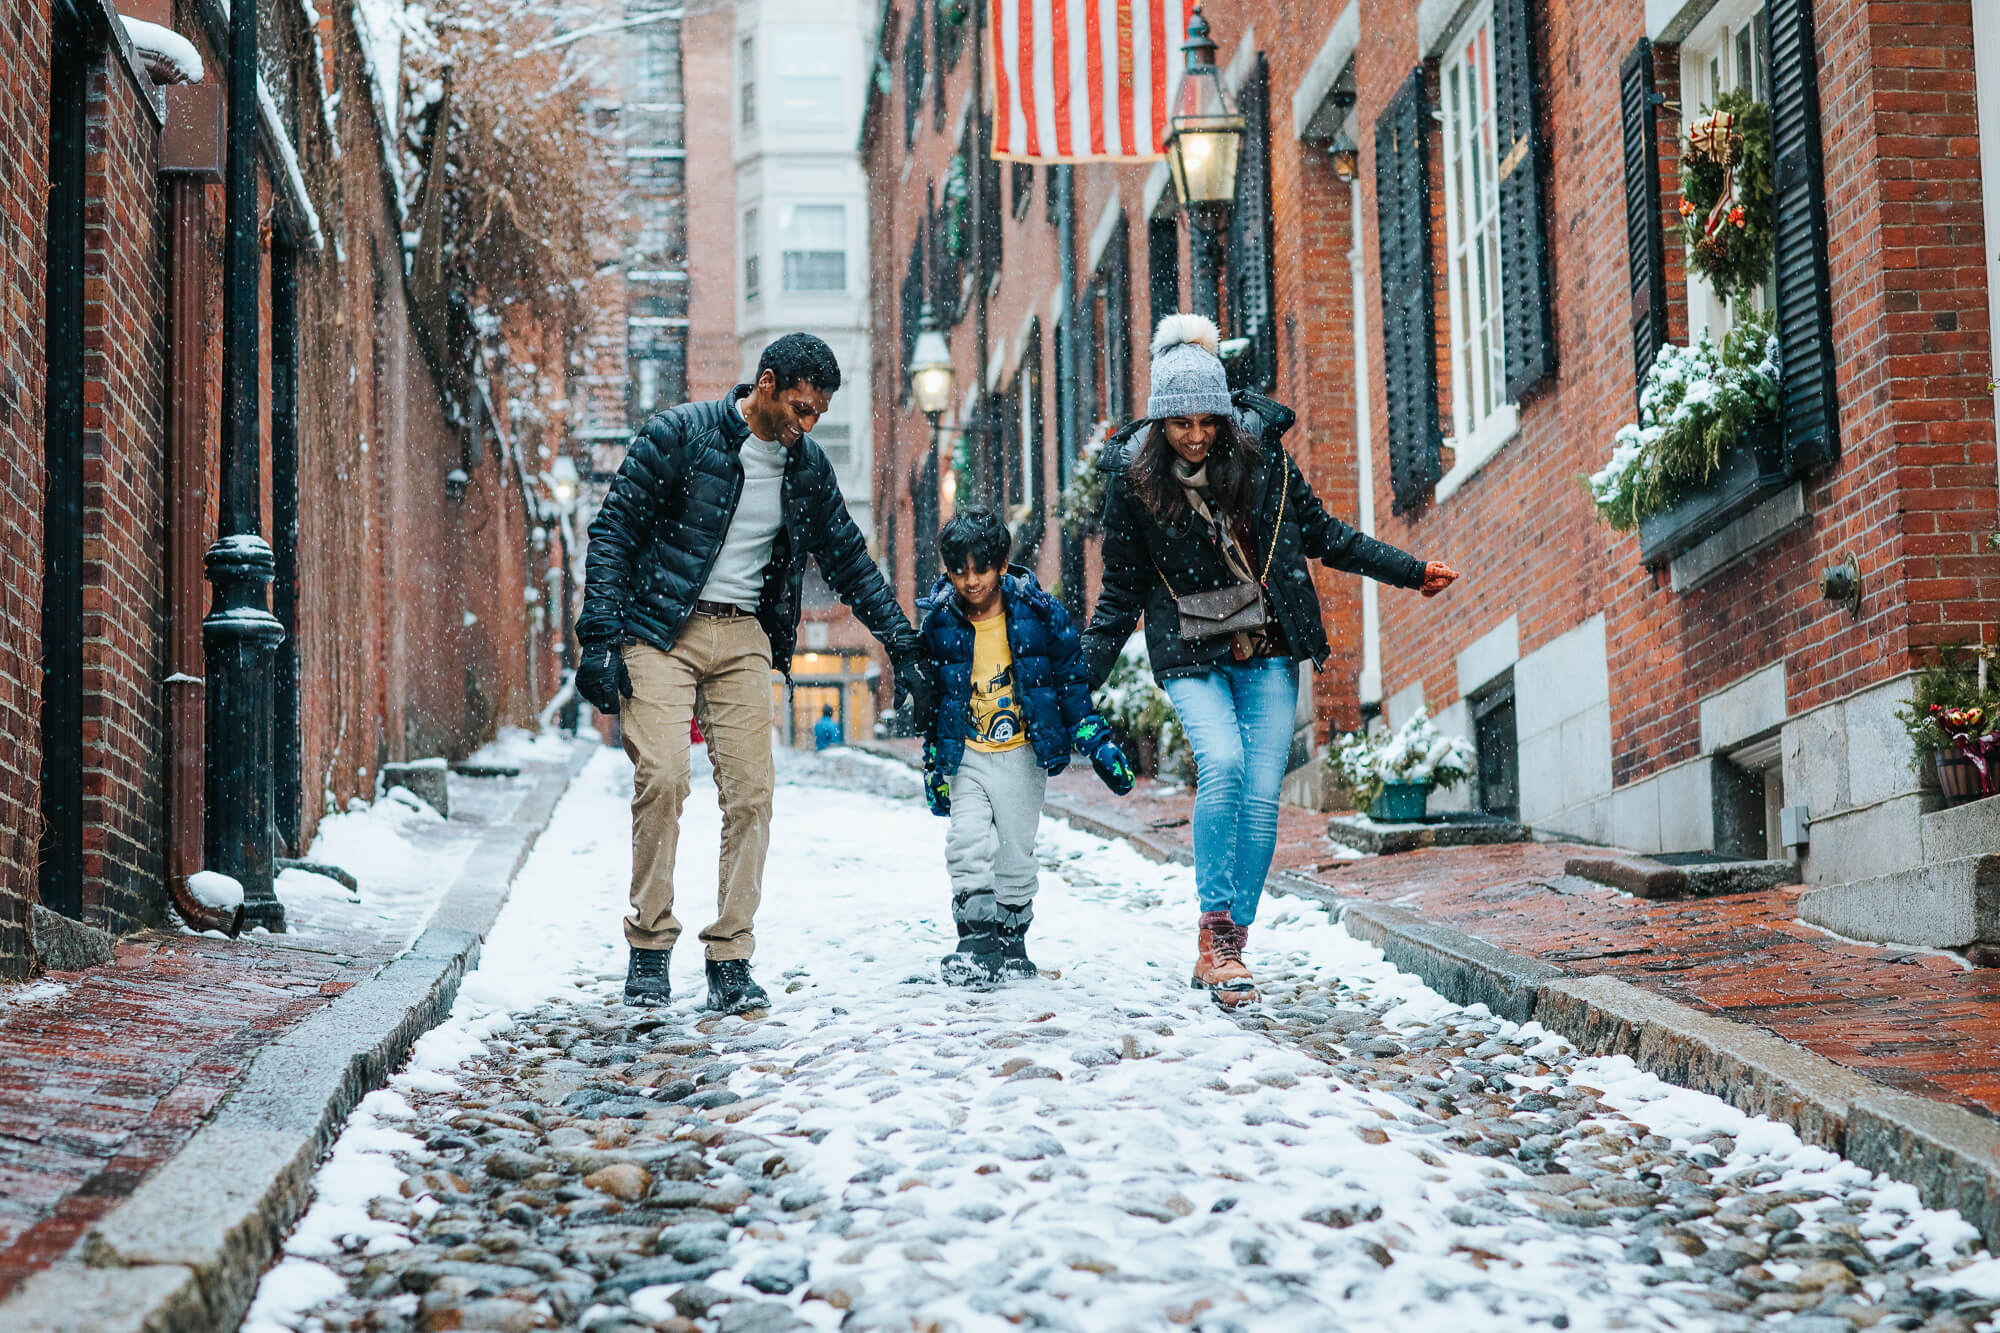 Mother and father hold their smiling 5 year old son's hands and walk down a cobblestone street in Boston's Beacon Hill; they're in winter coats and it's snowing, a light layer of white coats the street.